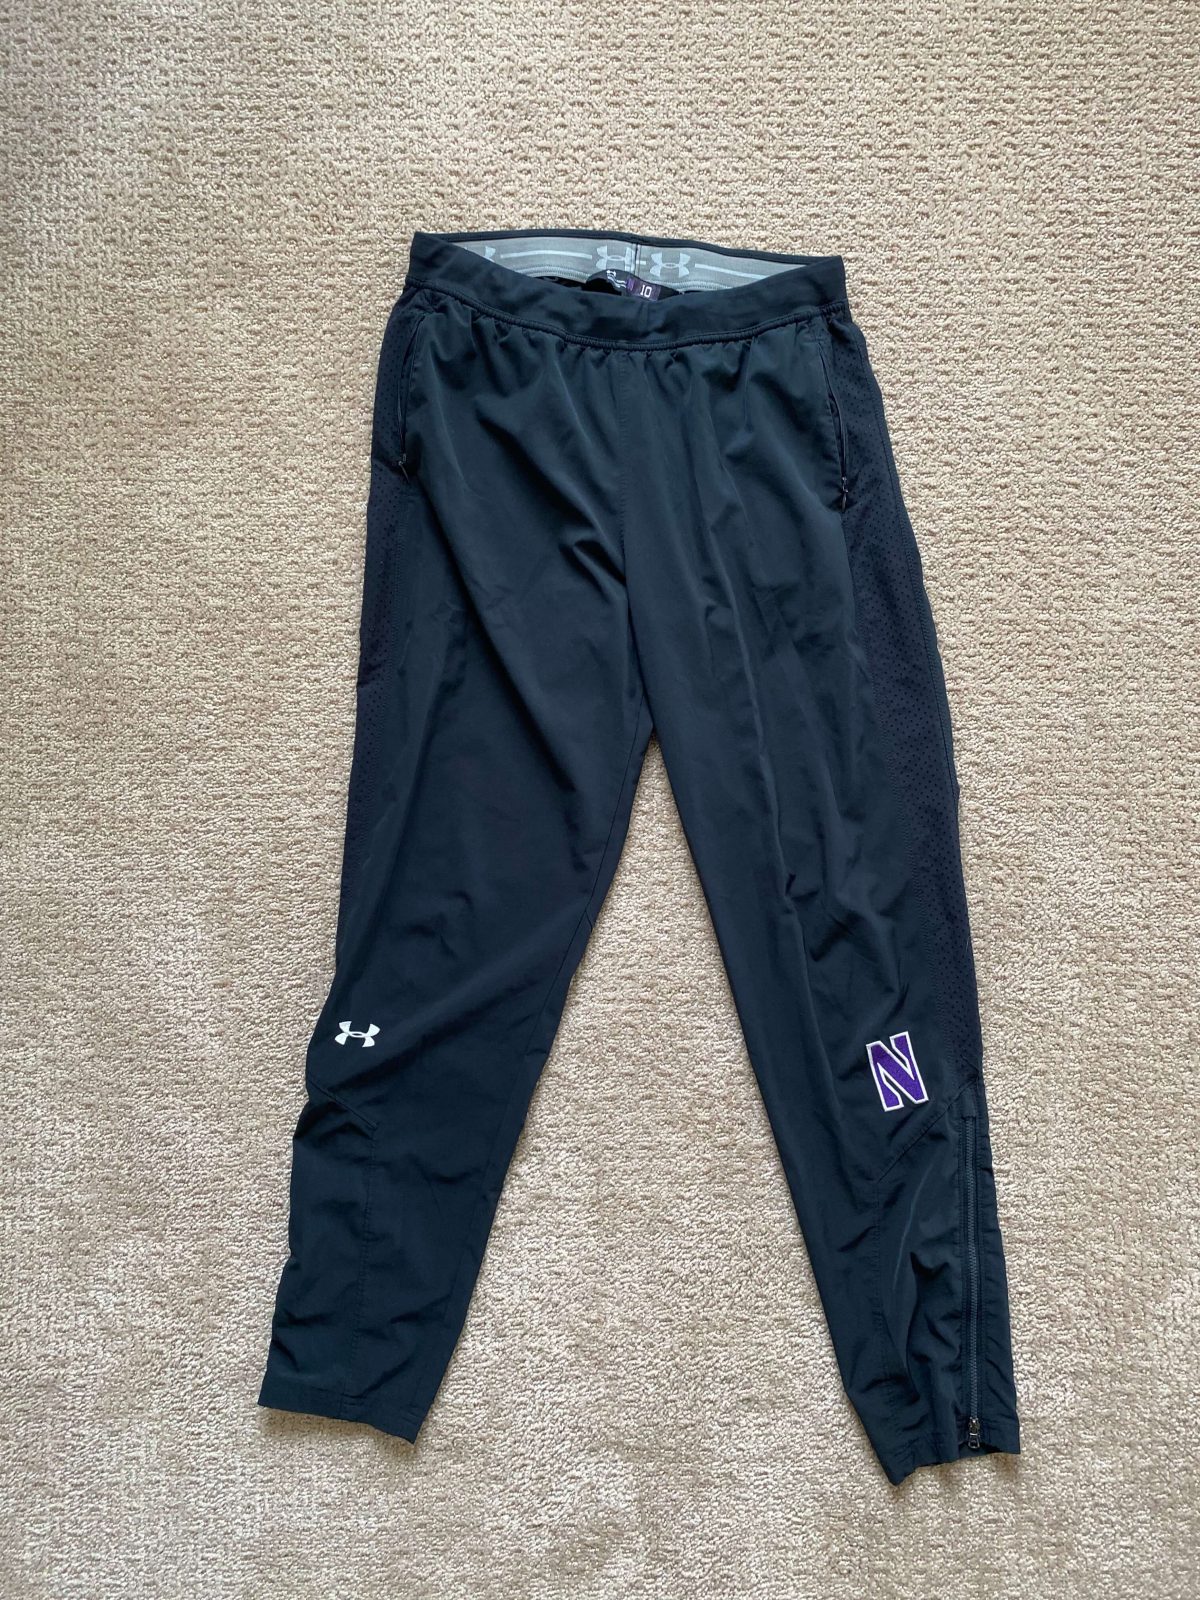 Amy Wang Northwestern Volleyball Under Armour Sweatpants : NARP Clothing